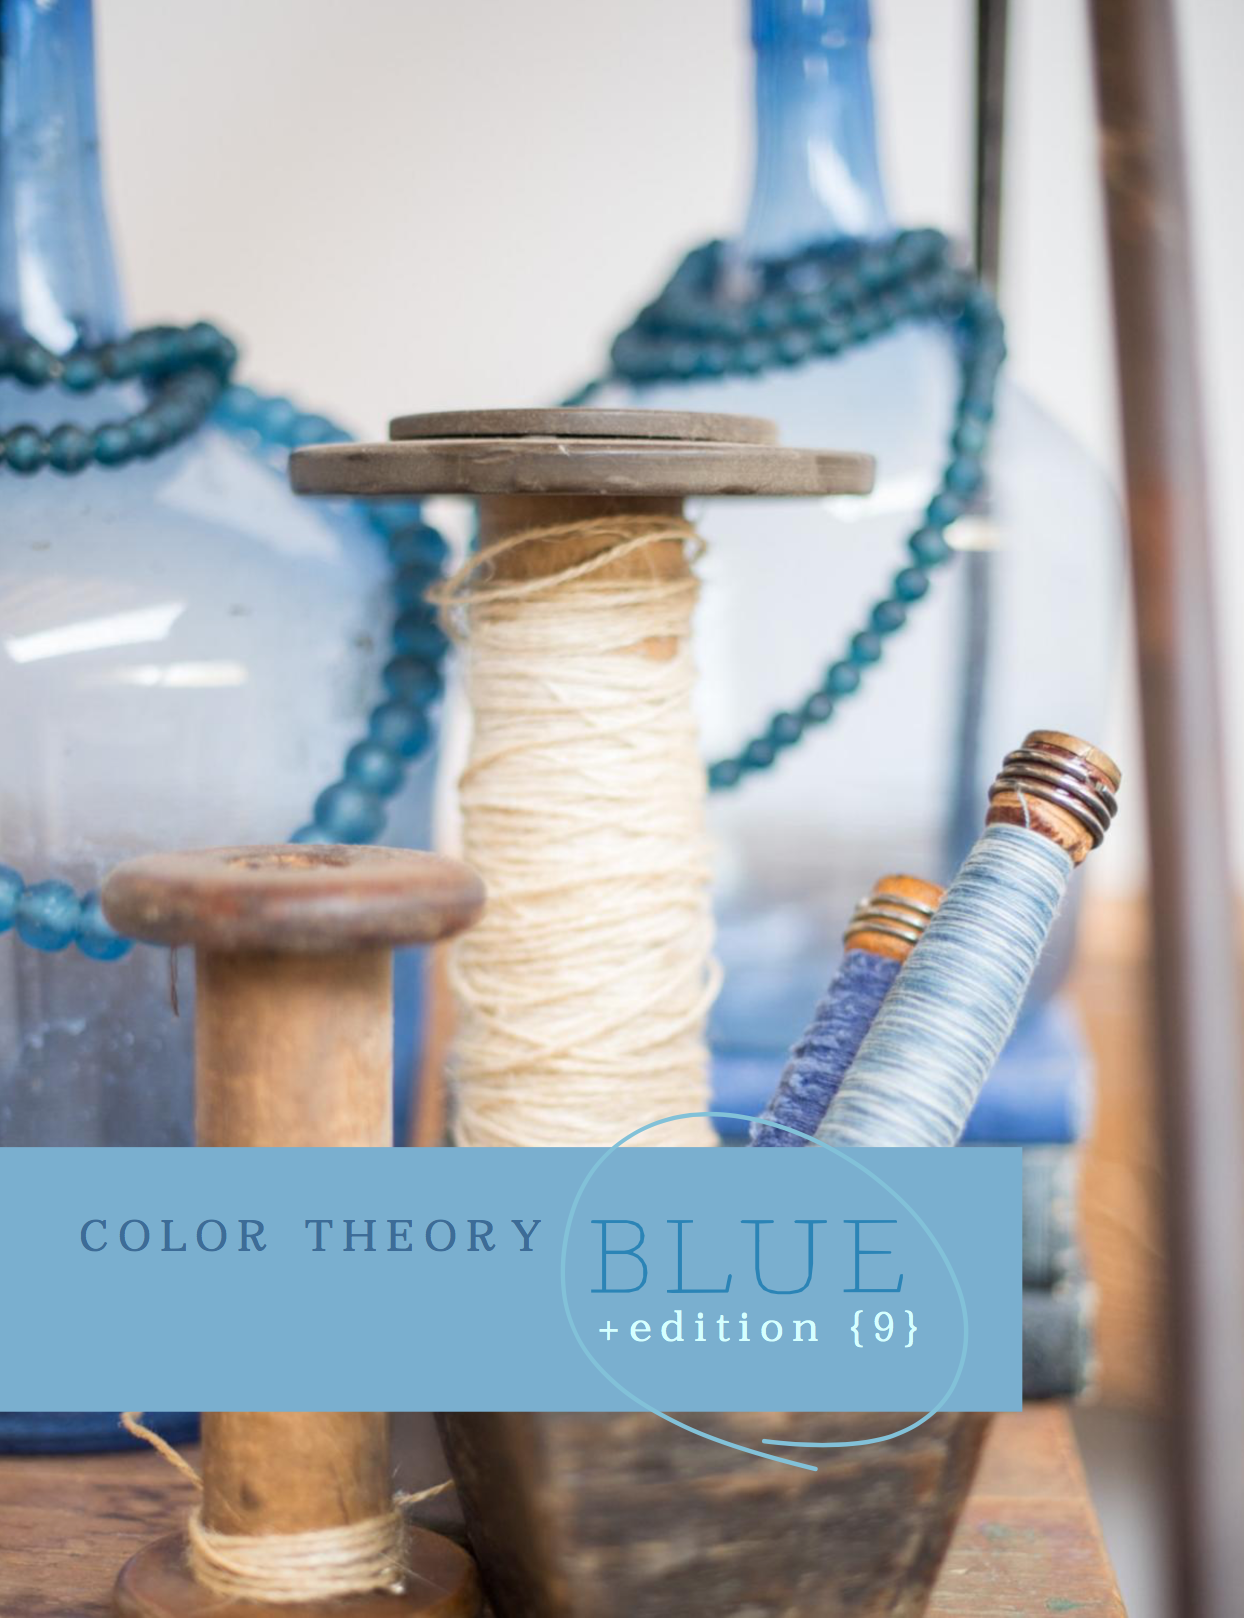 COLOR THEORY // BLUE